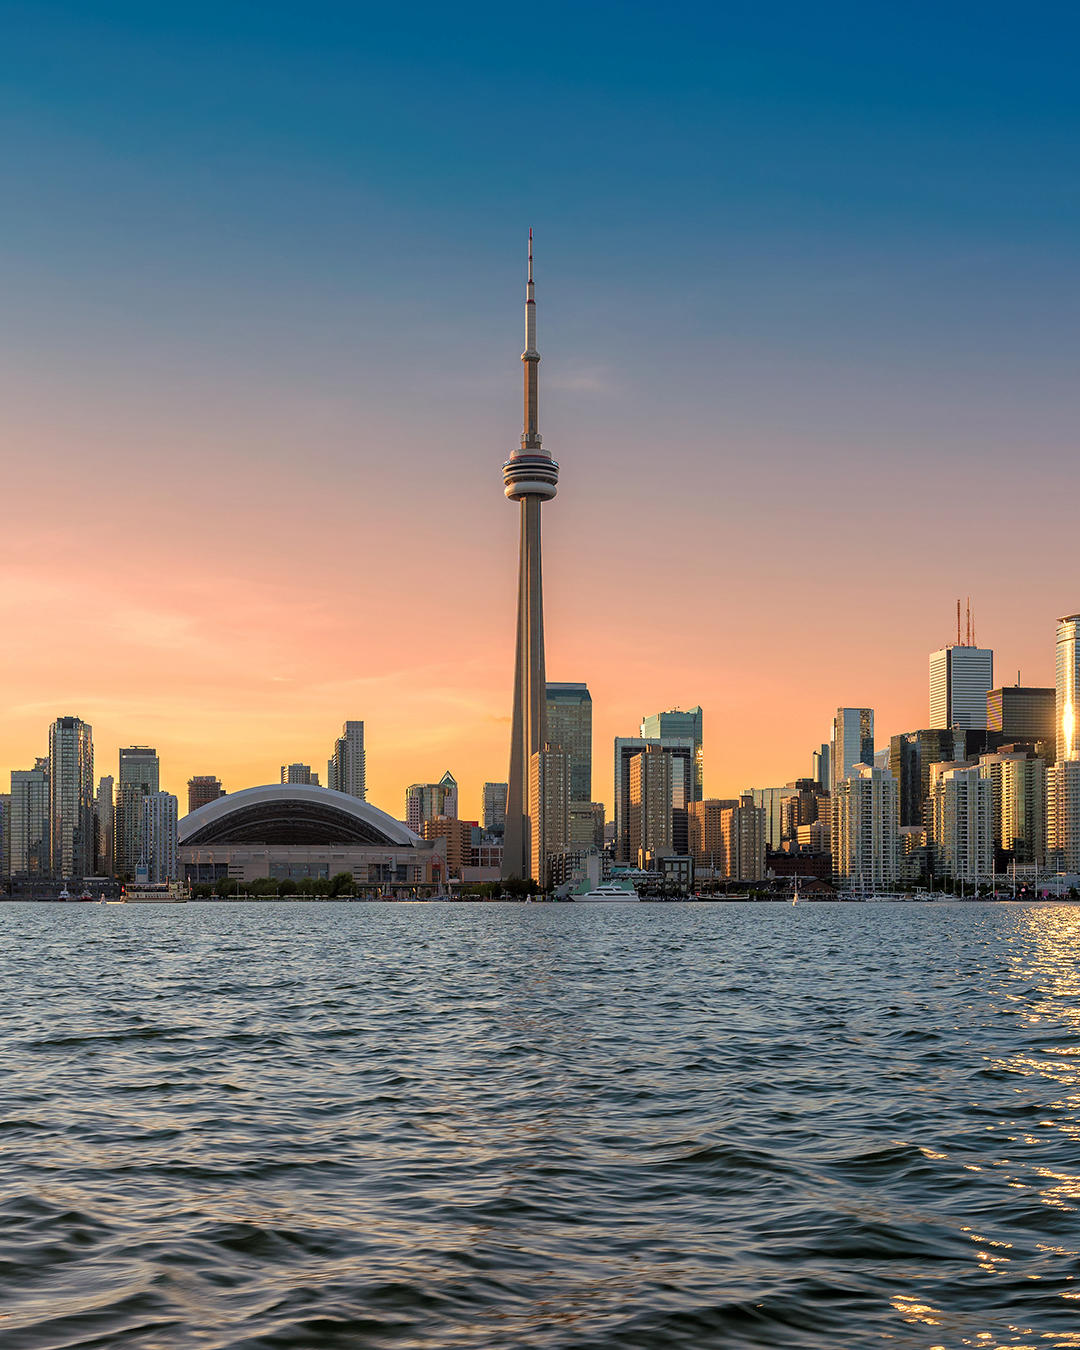 Toronto, we can't get enough of you